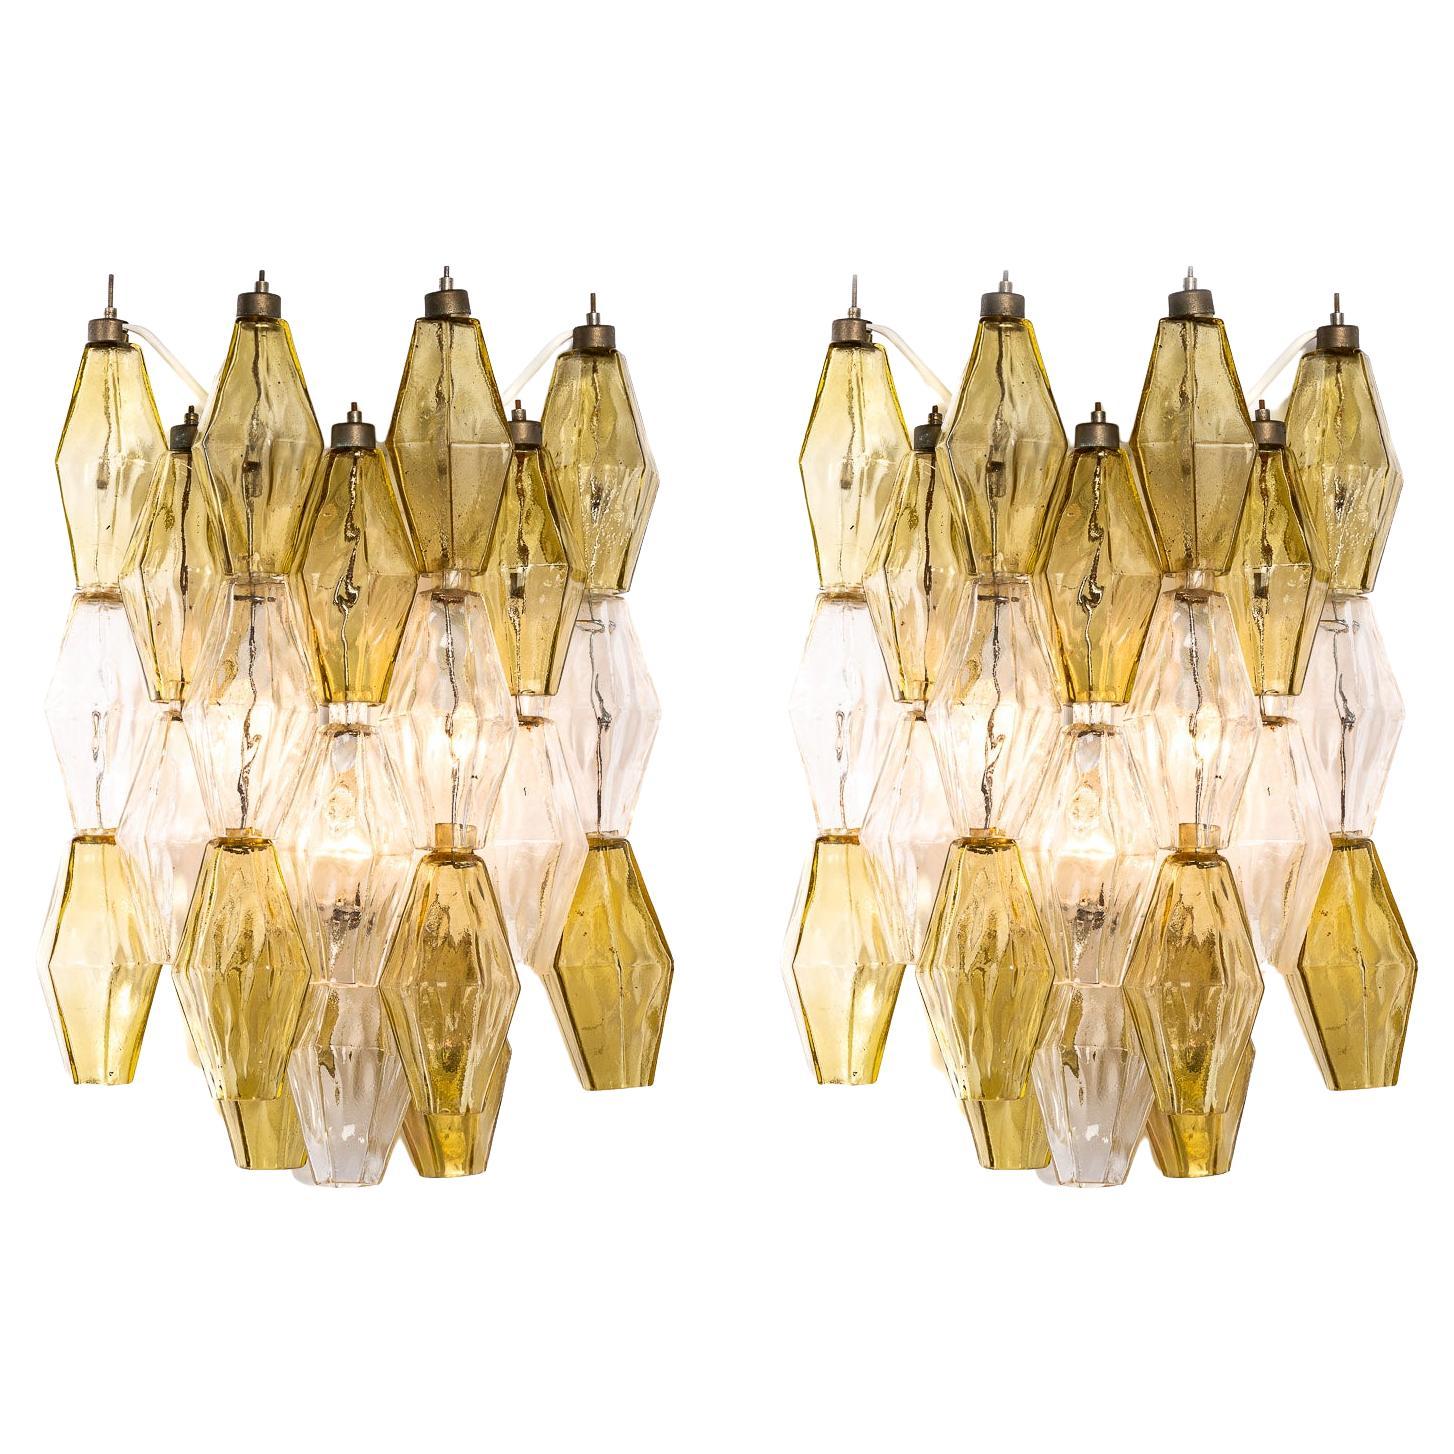 1960s Pair of Hand Blown Glass Sconces by Carlo Scarpa for Venini